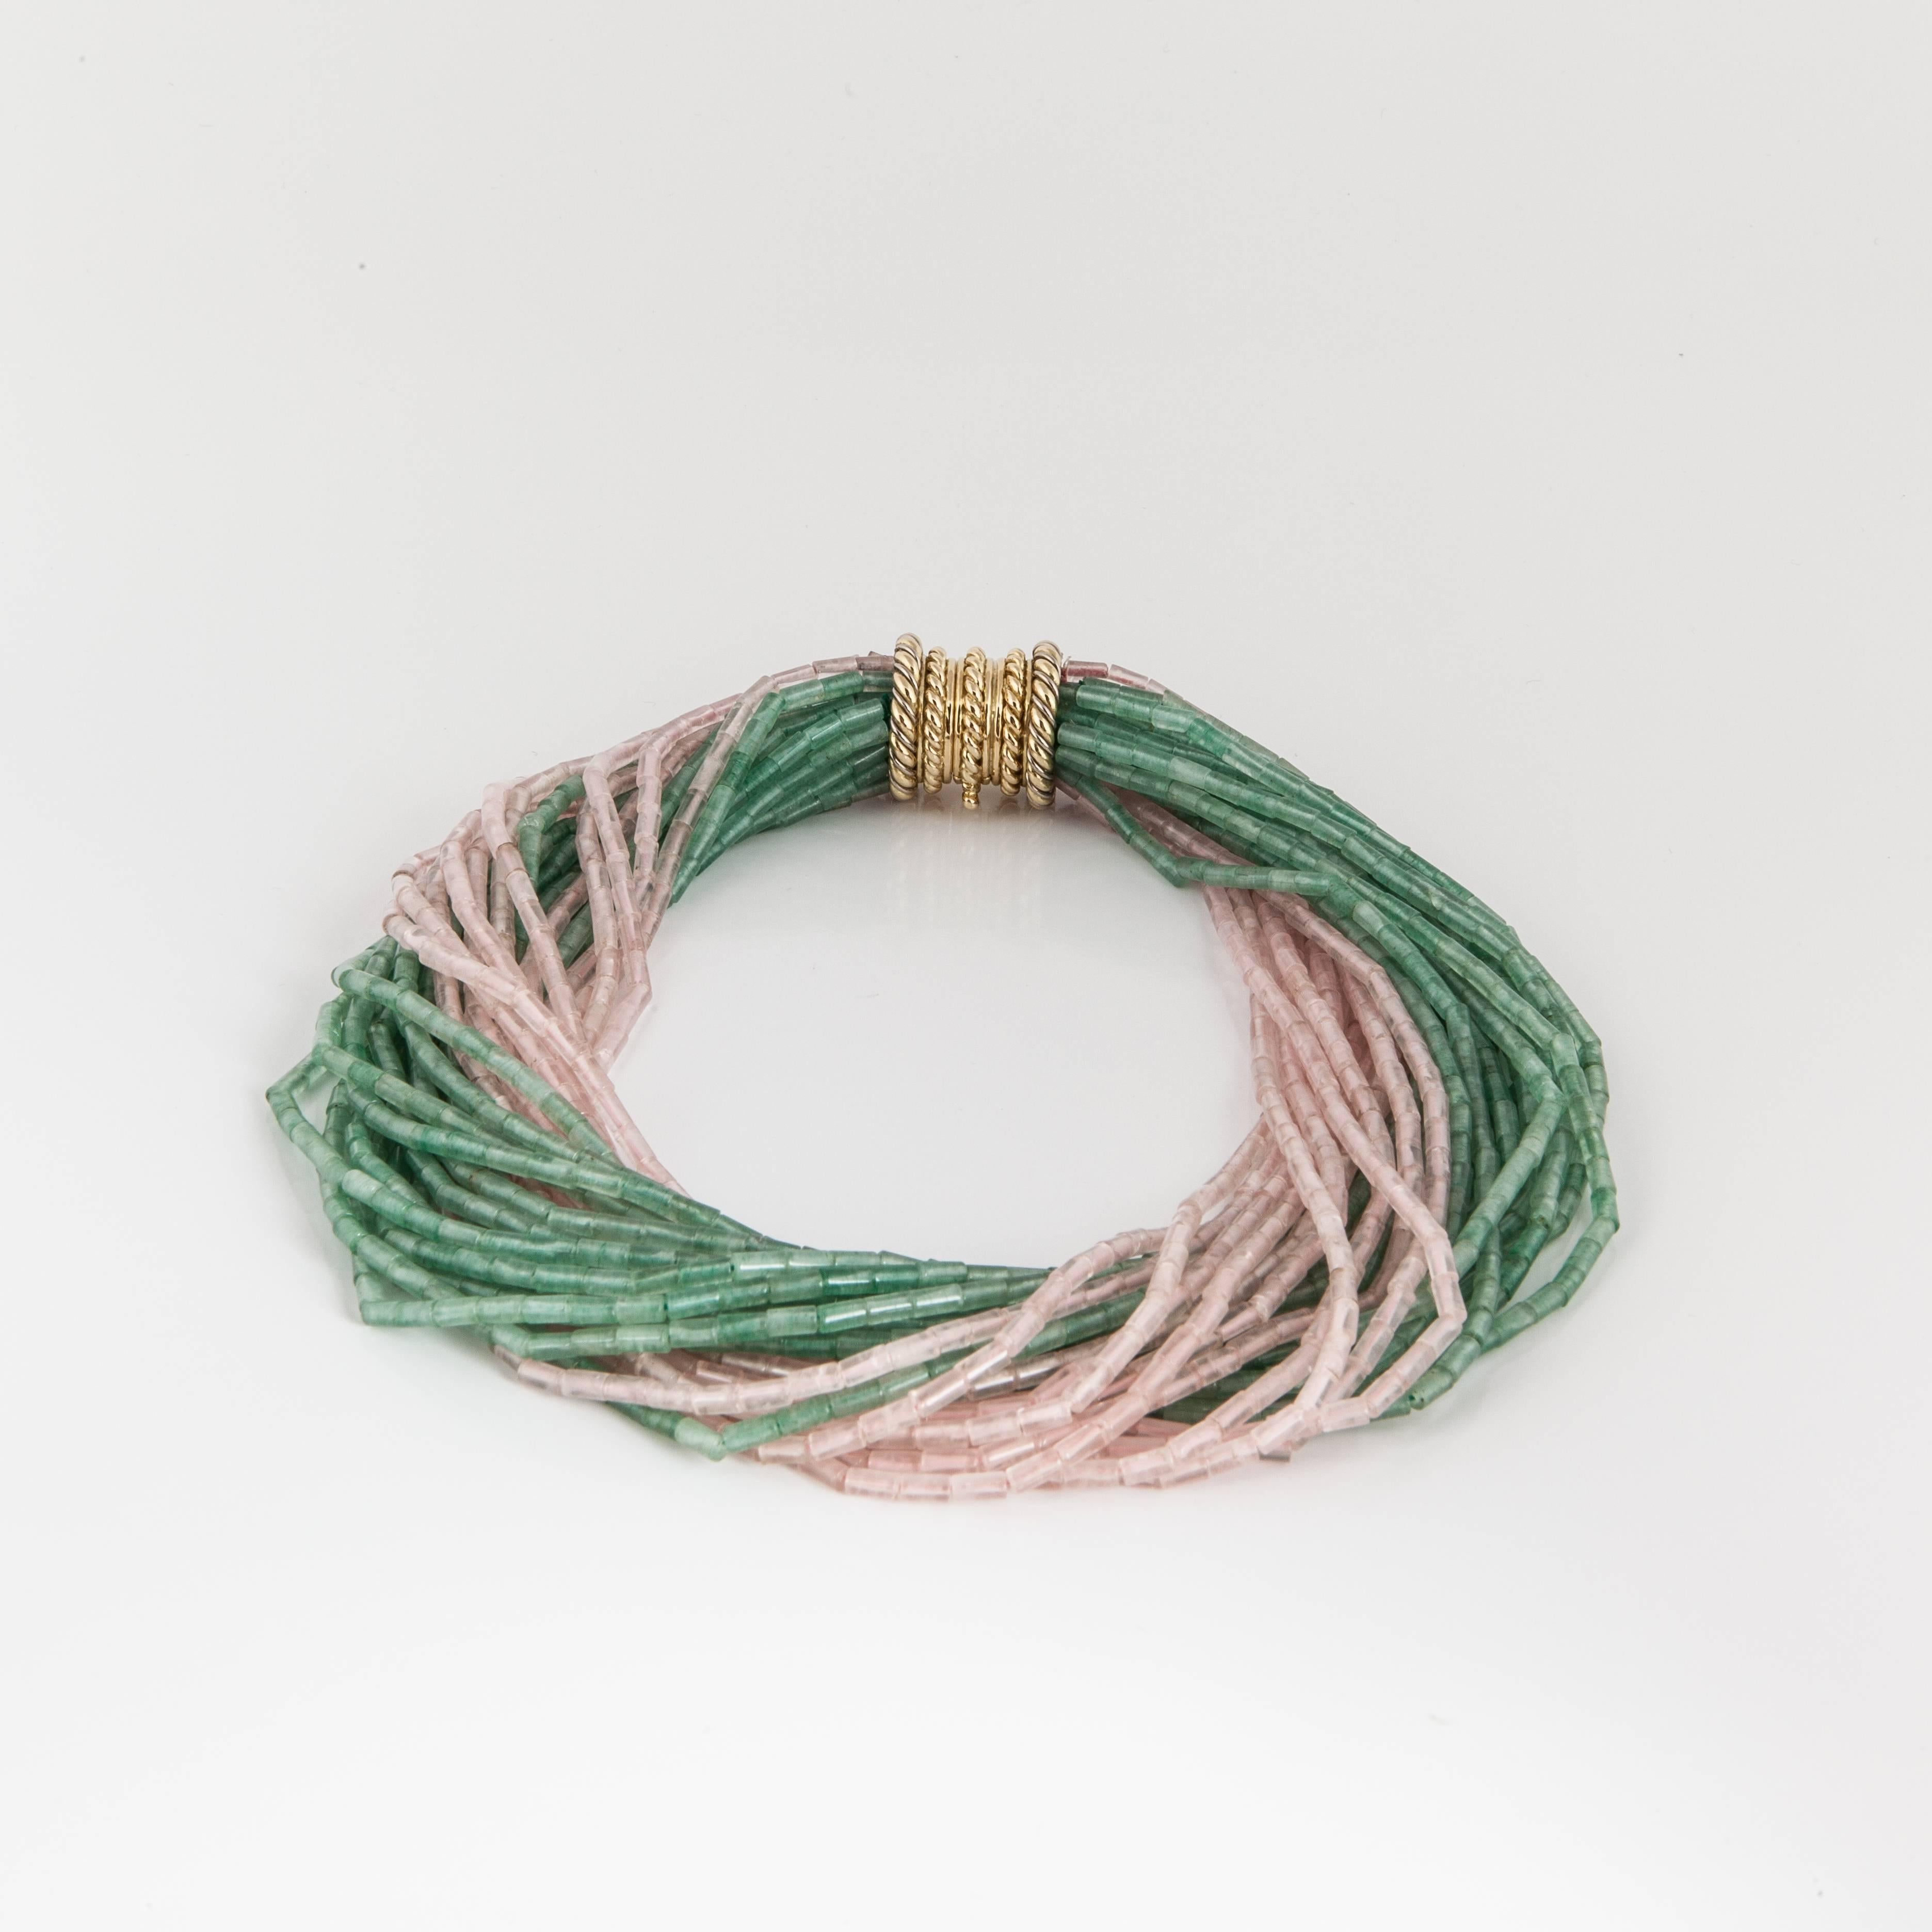 Tiffany & Co. tornado necklace featuring multiple strands of green and pink quartz beads forming a twisted necklace.  The 18K yellow gold clasp has a rope design and is inscribed on the inside 